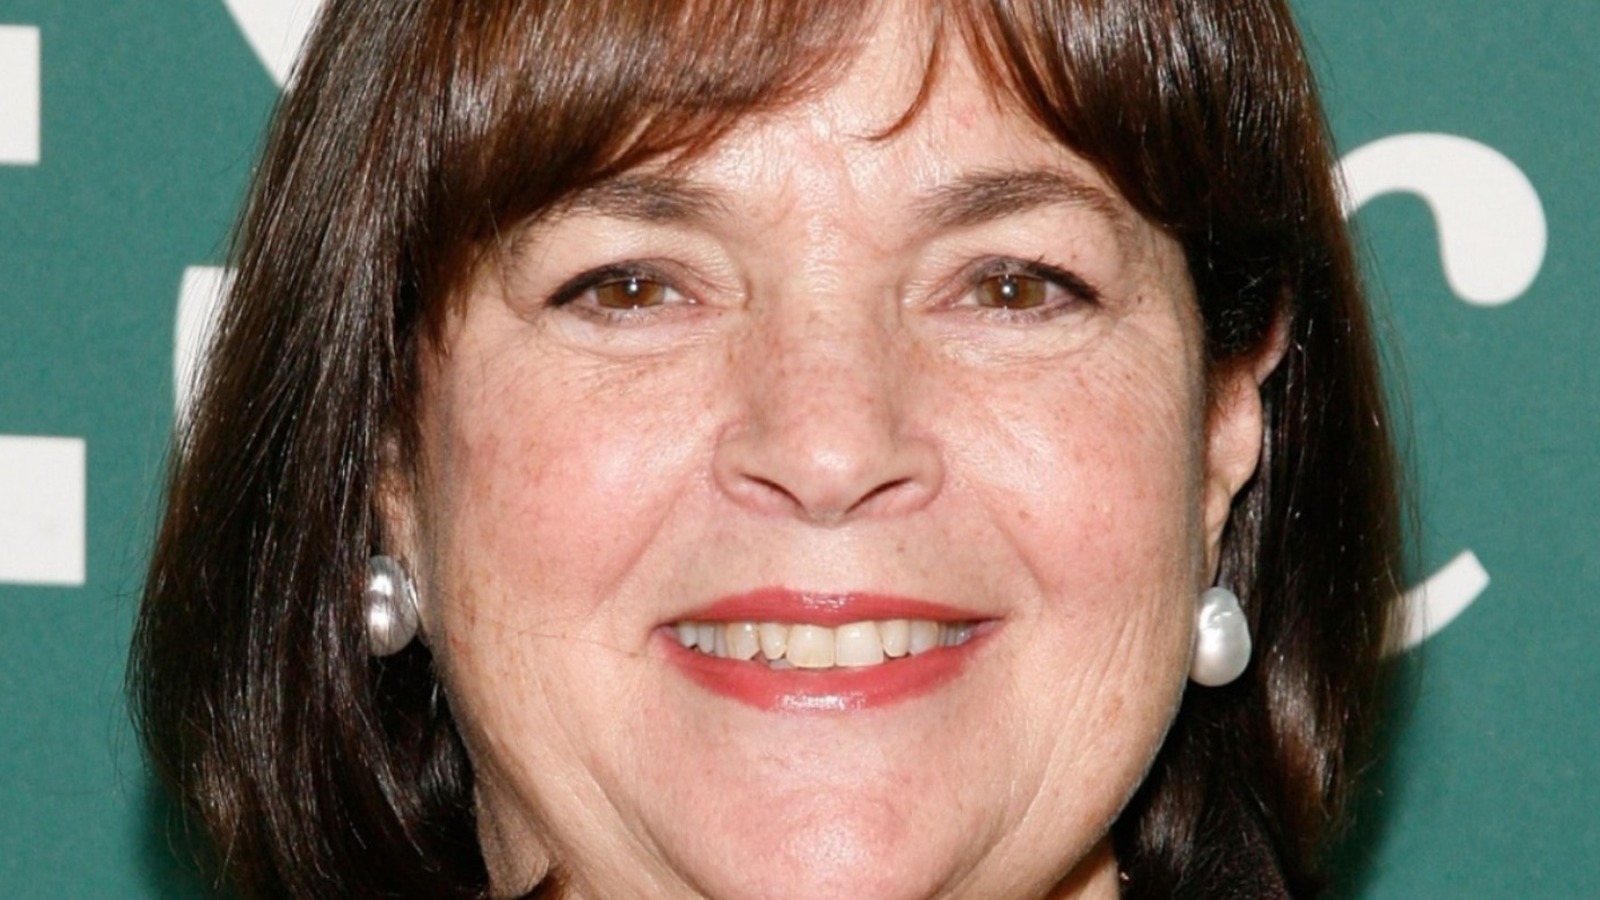 Instagram Is Envious Of Ina Garten's French 'Breakfast Of Champions'